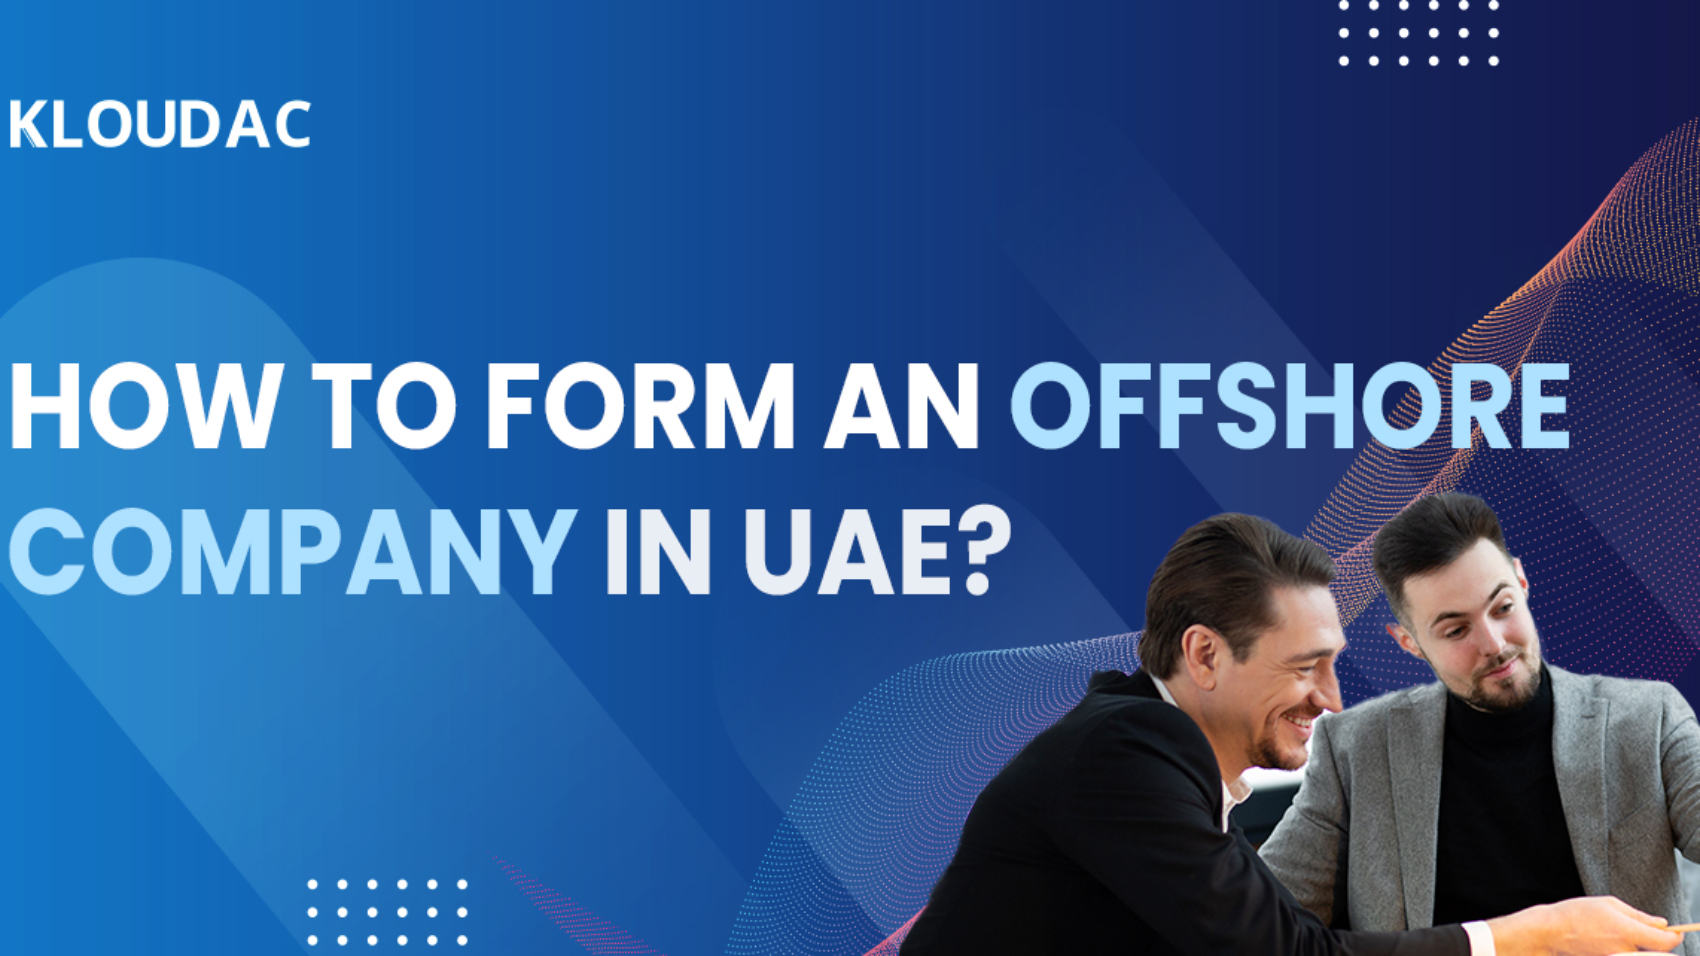 How to form an offshore company in the UAE?